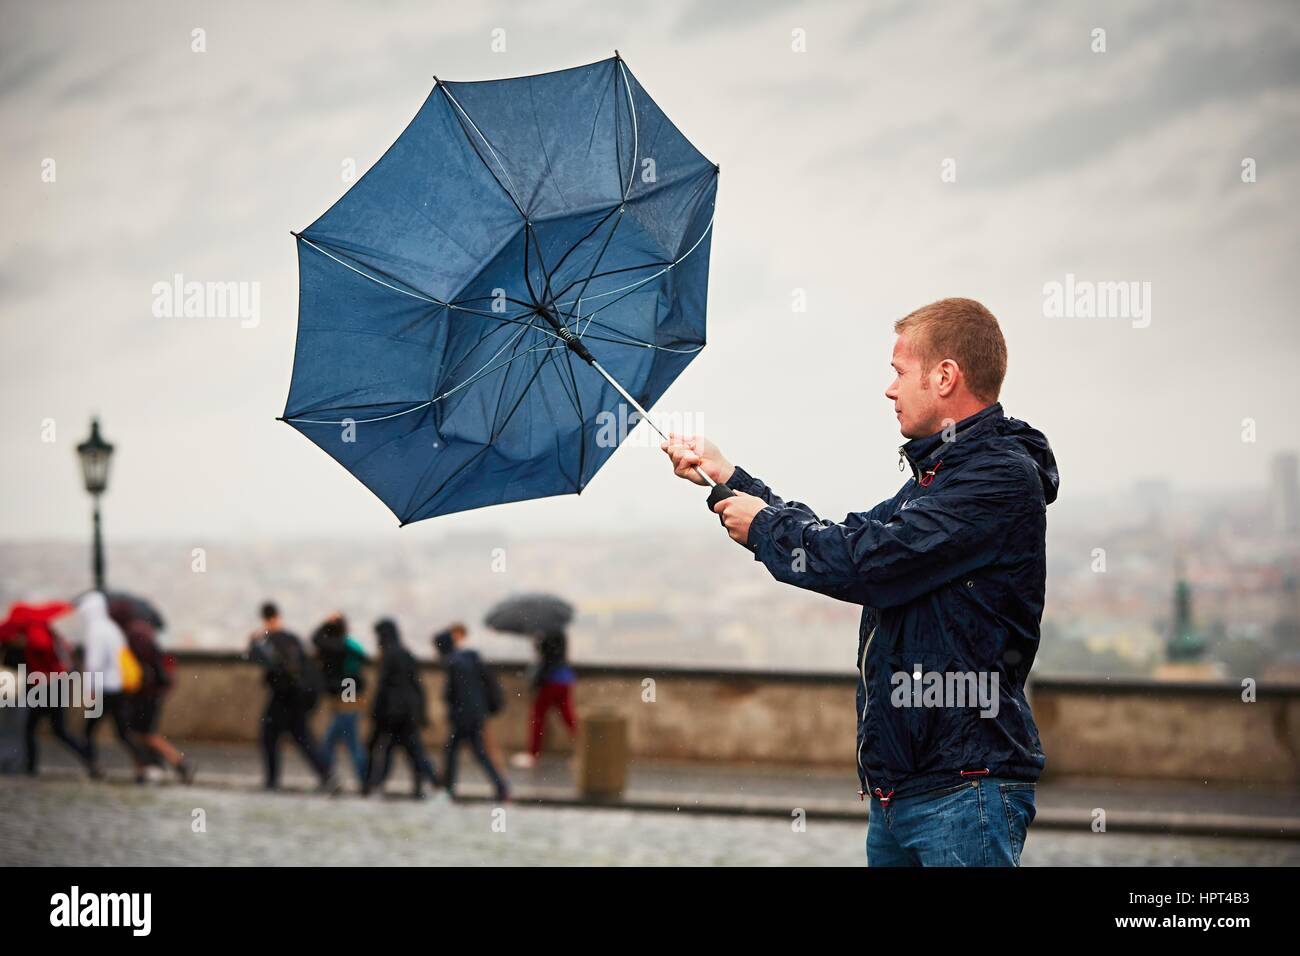 Rain in the city. Young man is holding blue umbrella during thunderstorm. Street of Prague, Czech Republic. Stock Photo